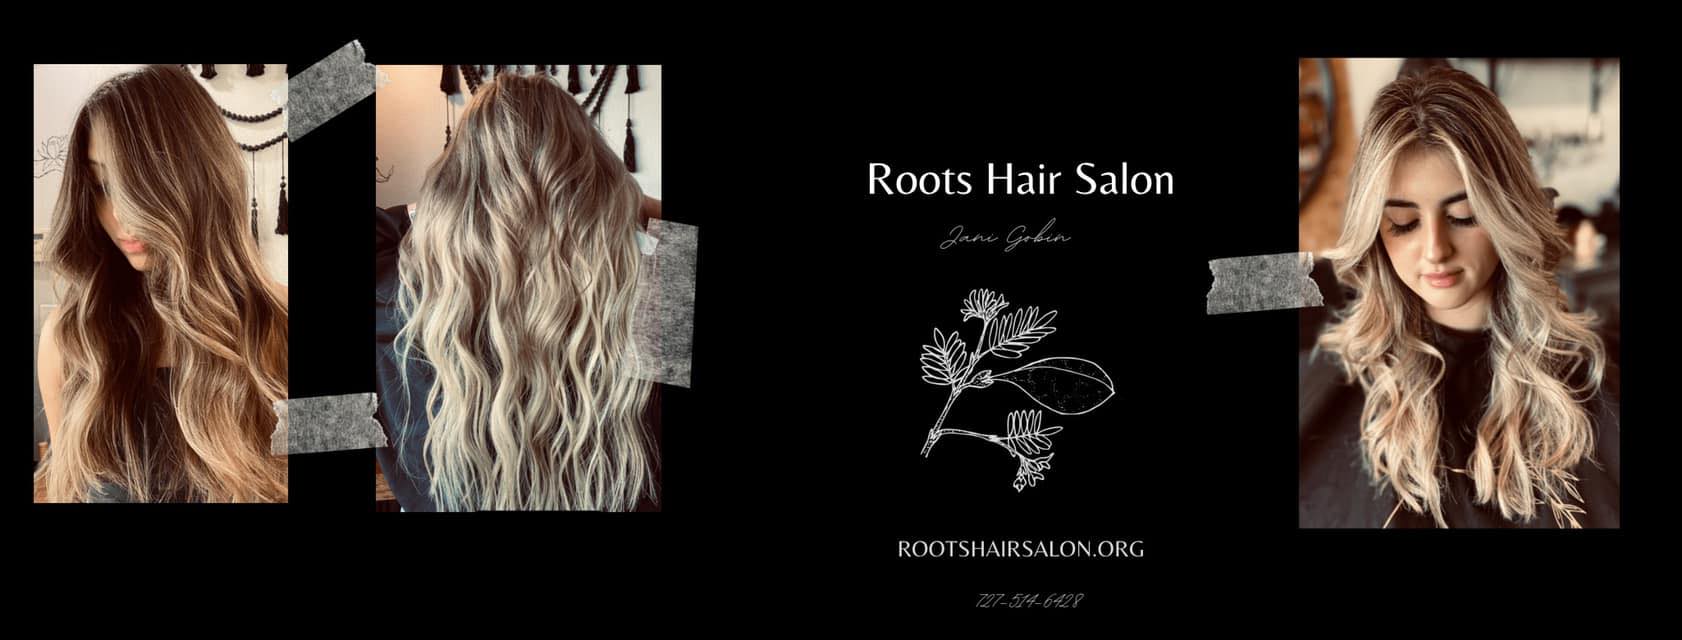 Roots Hair Salon 8540 Old County Rd 54, New Port Richey, FL 34653